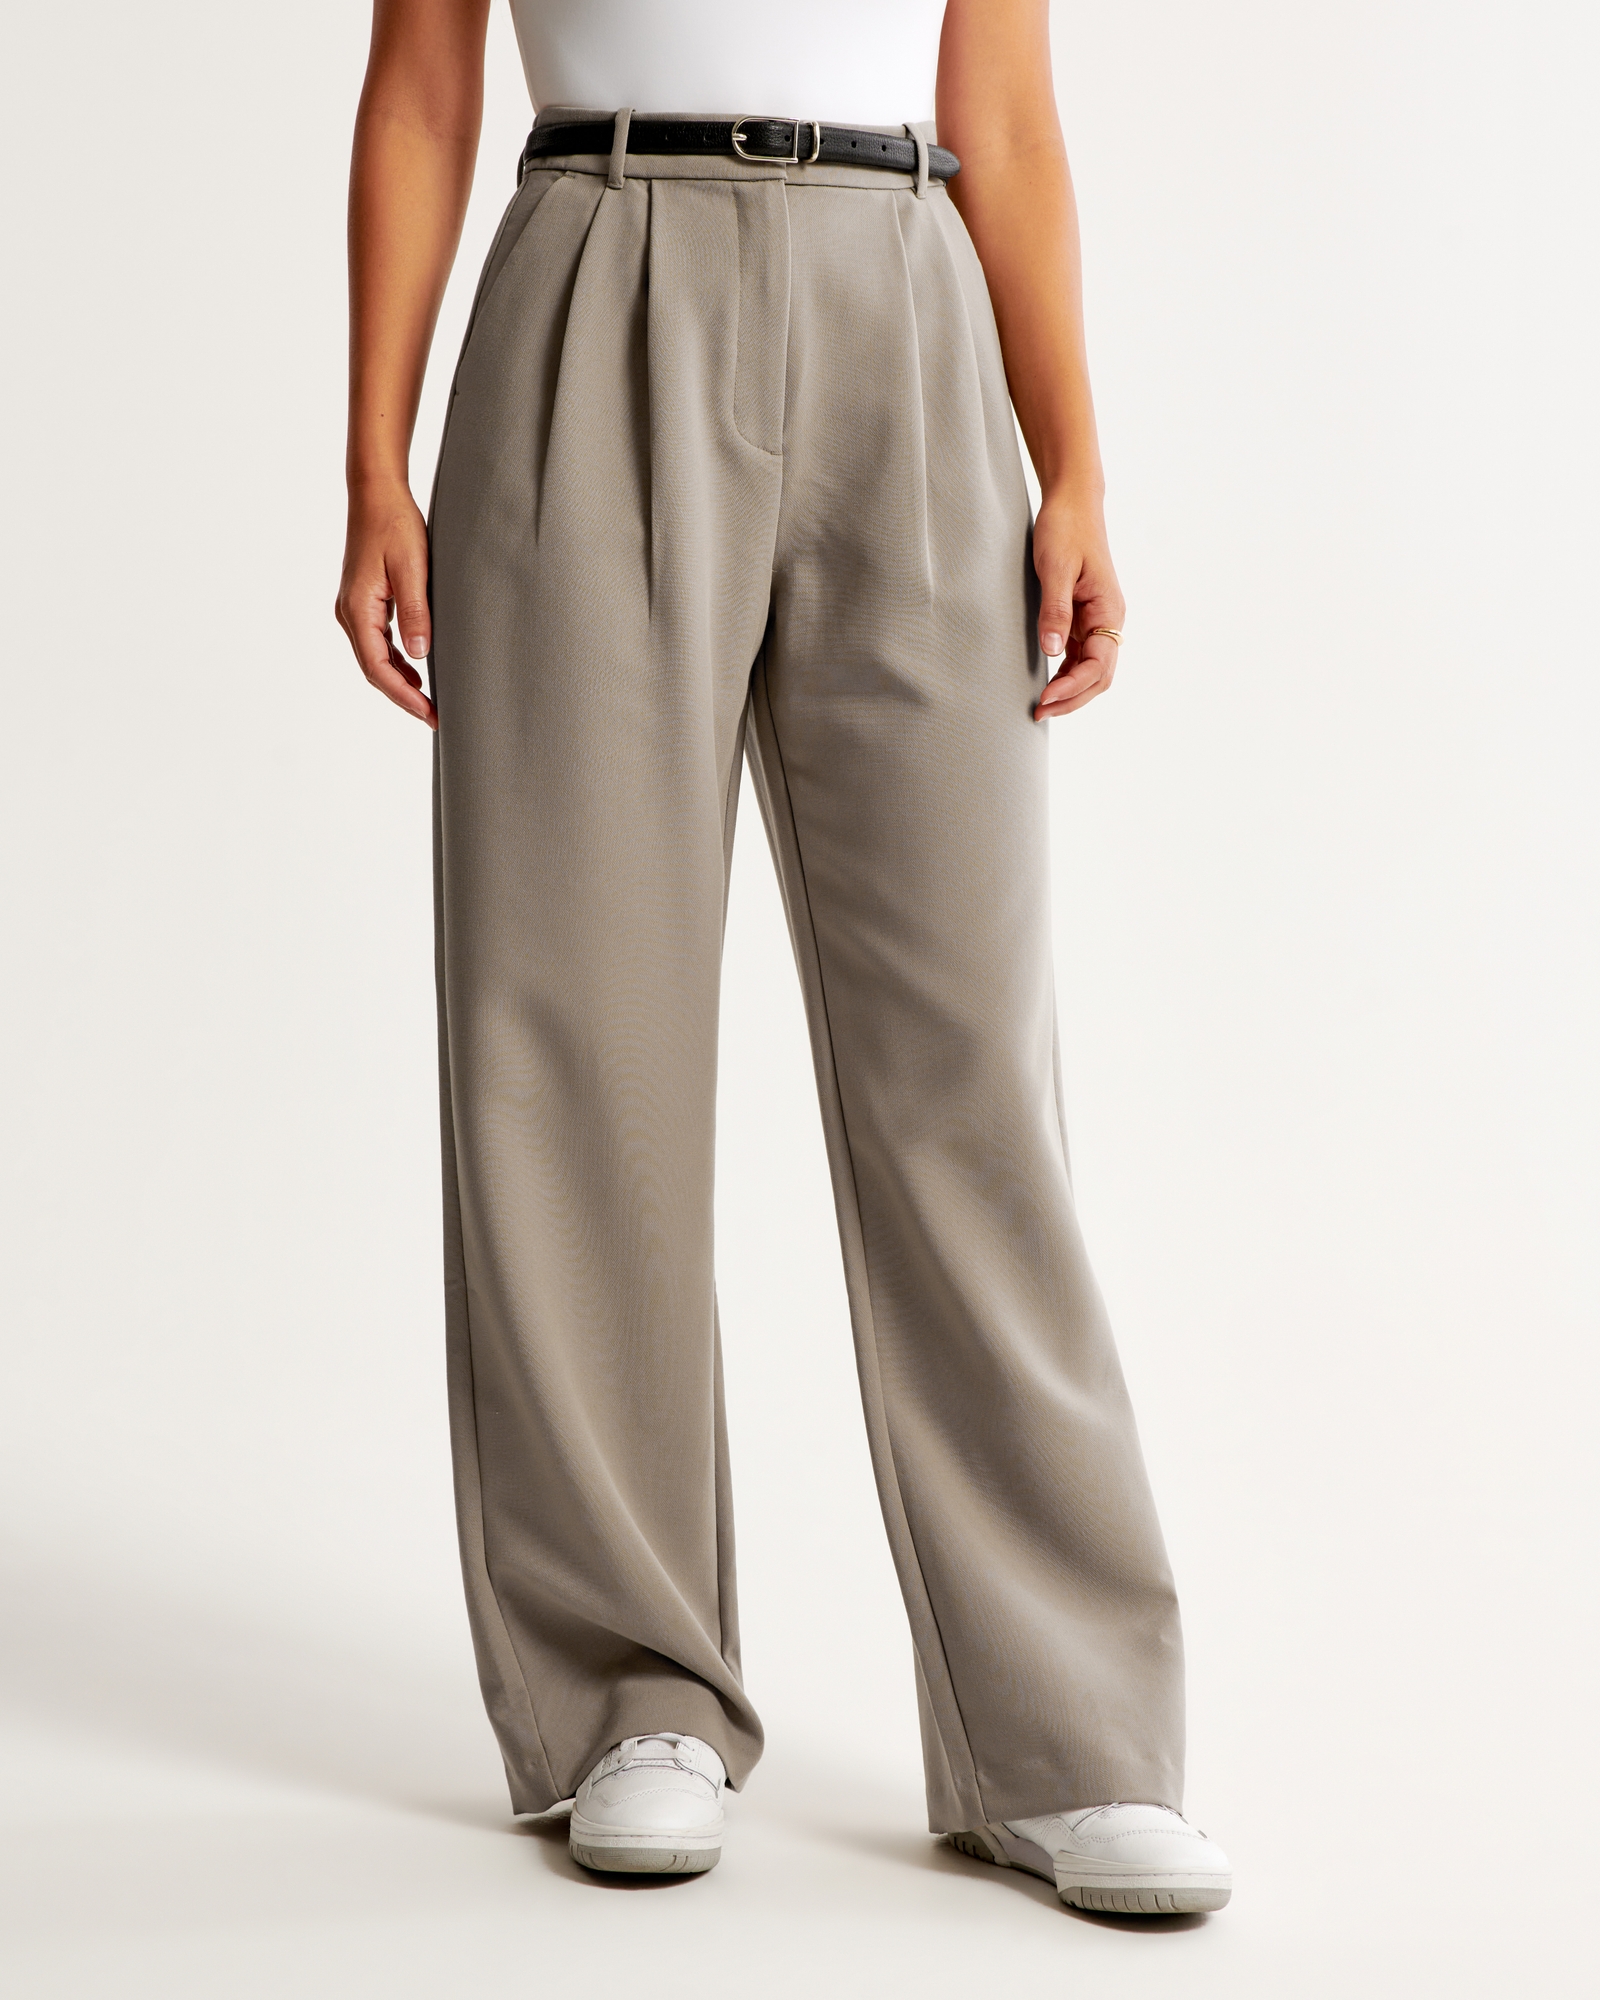 Abercrombie curve love Sloan tailored pants. That's it. : r